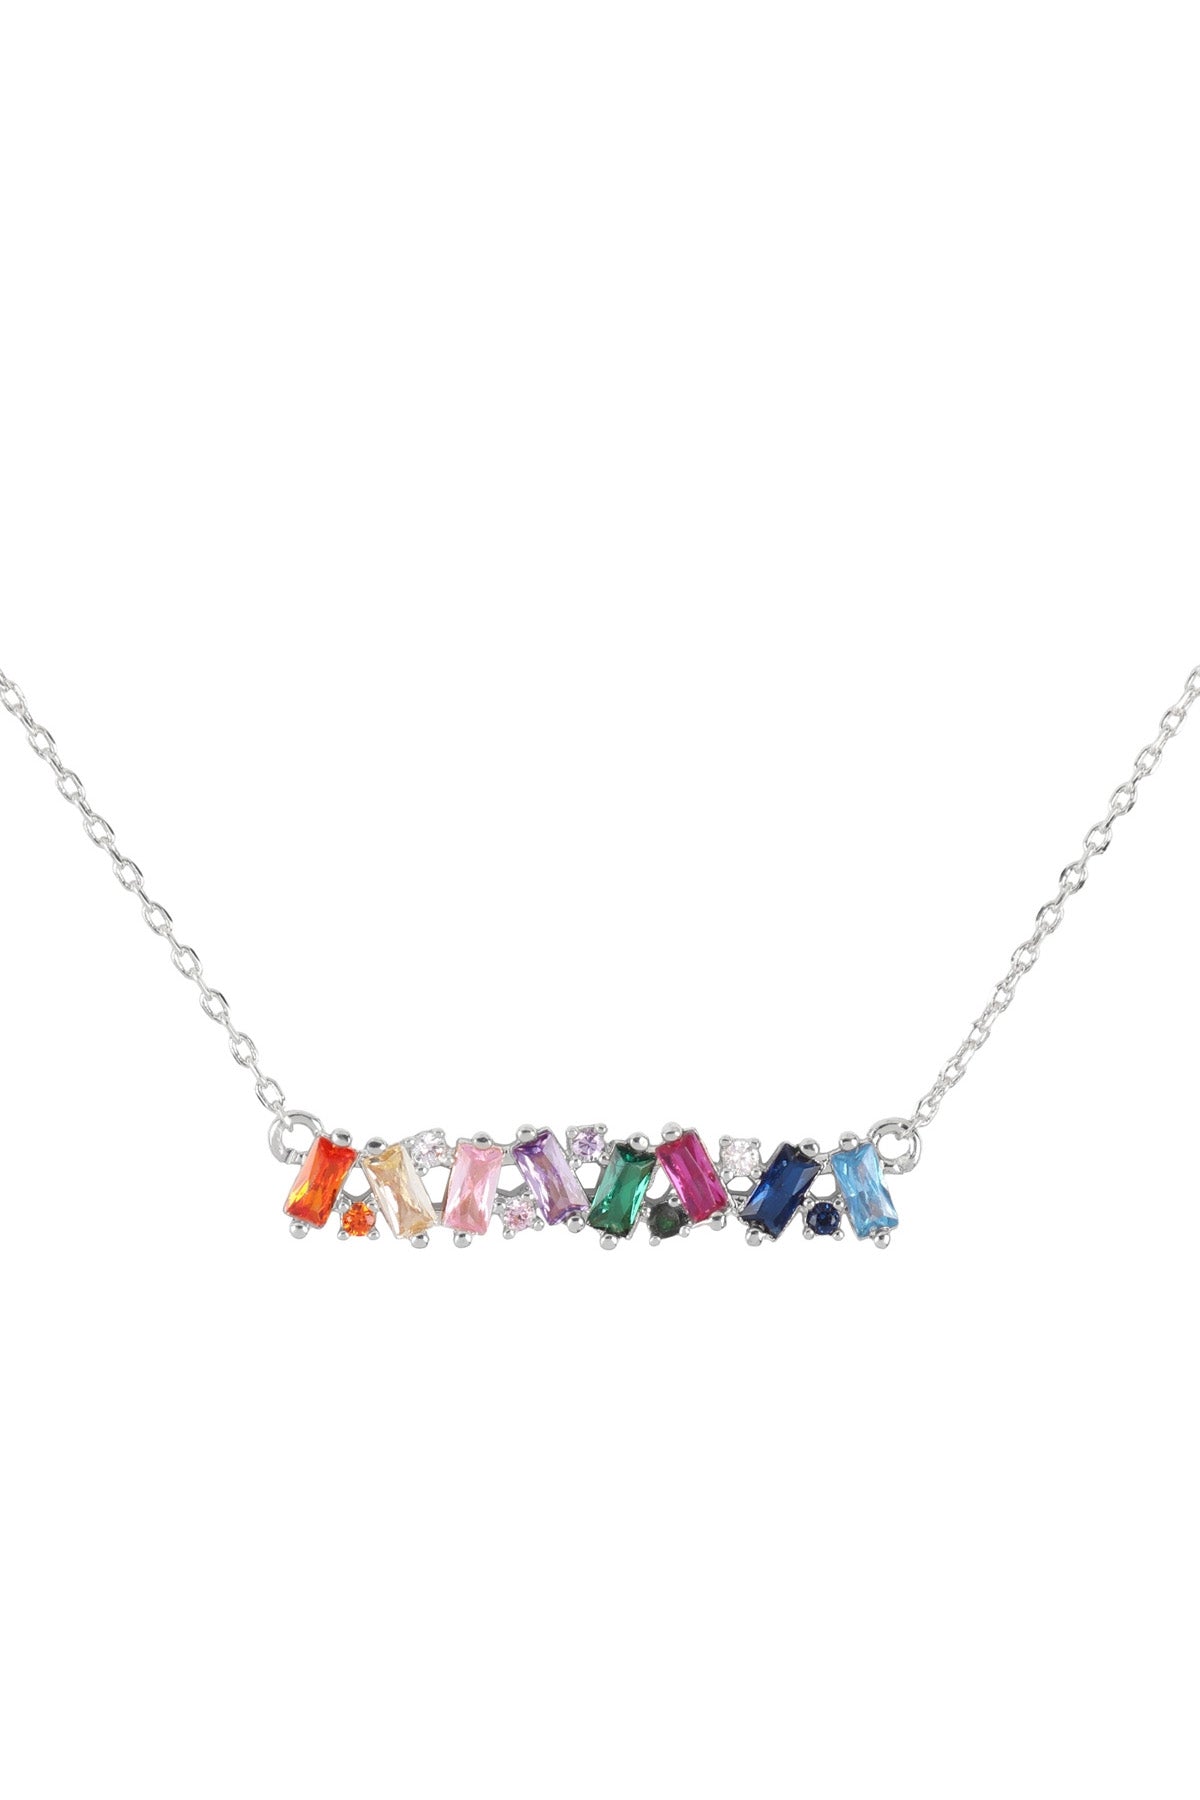 MULTI COLOR CRYSTAL BRASS NECKLACE/6PCS (NOW $3.50 ONLY!)